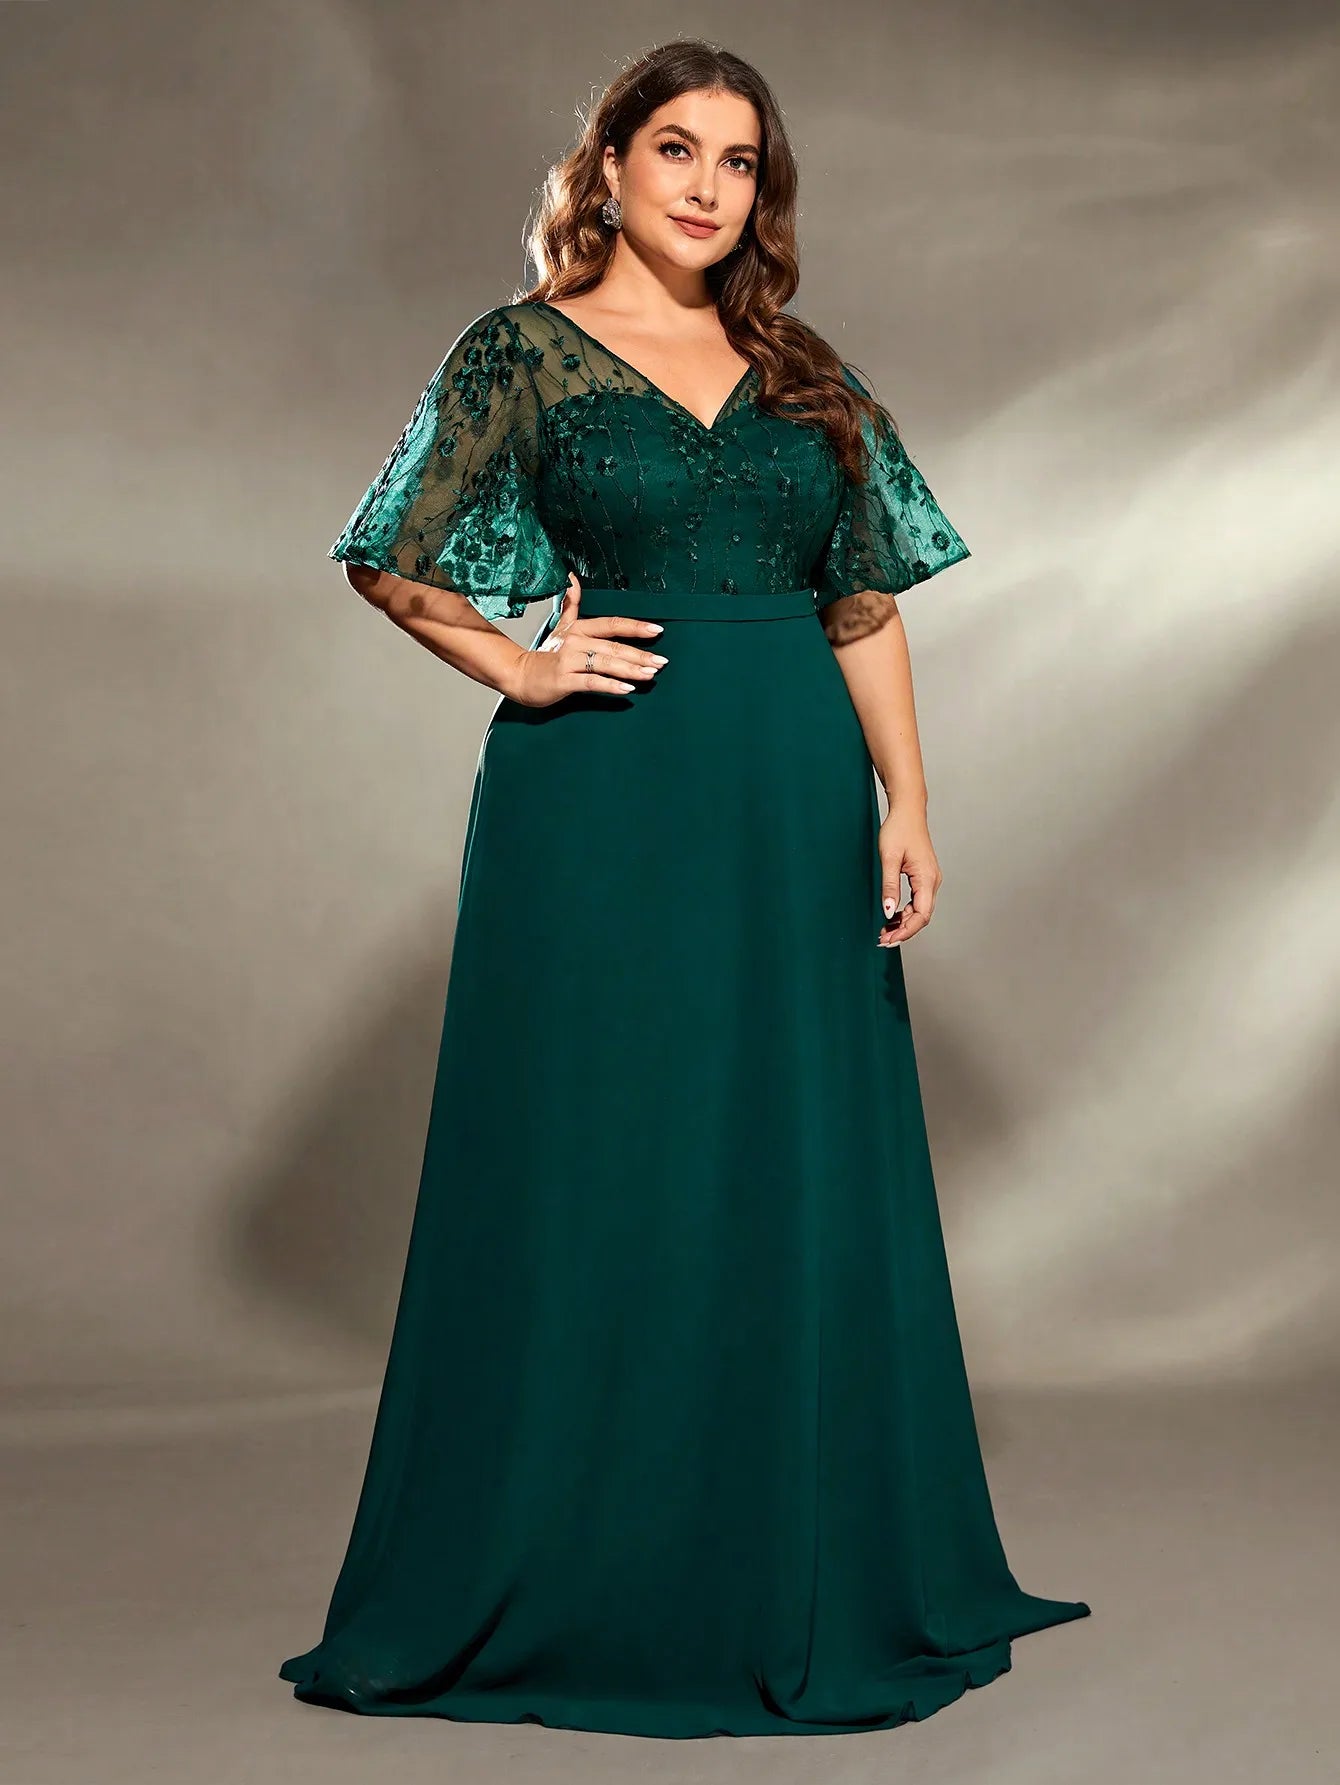 Mgiacy plus size V-neck See-through trumpet sleeve embroidered chiffon full skirt Evening gown Ball dress Party dress